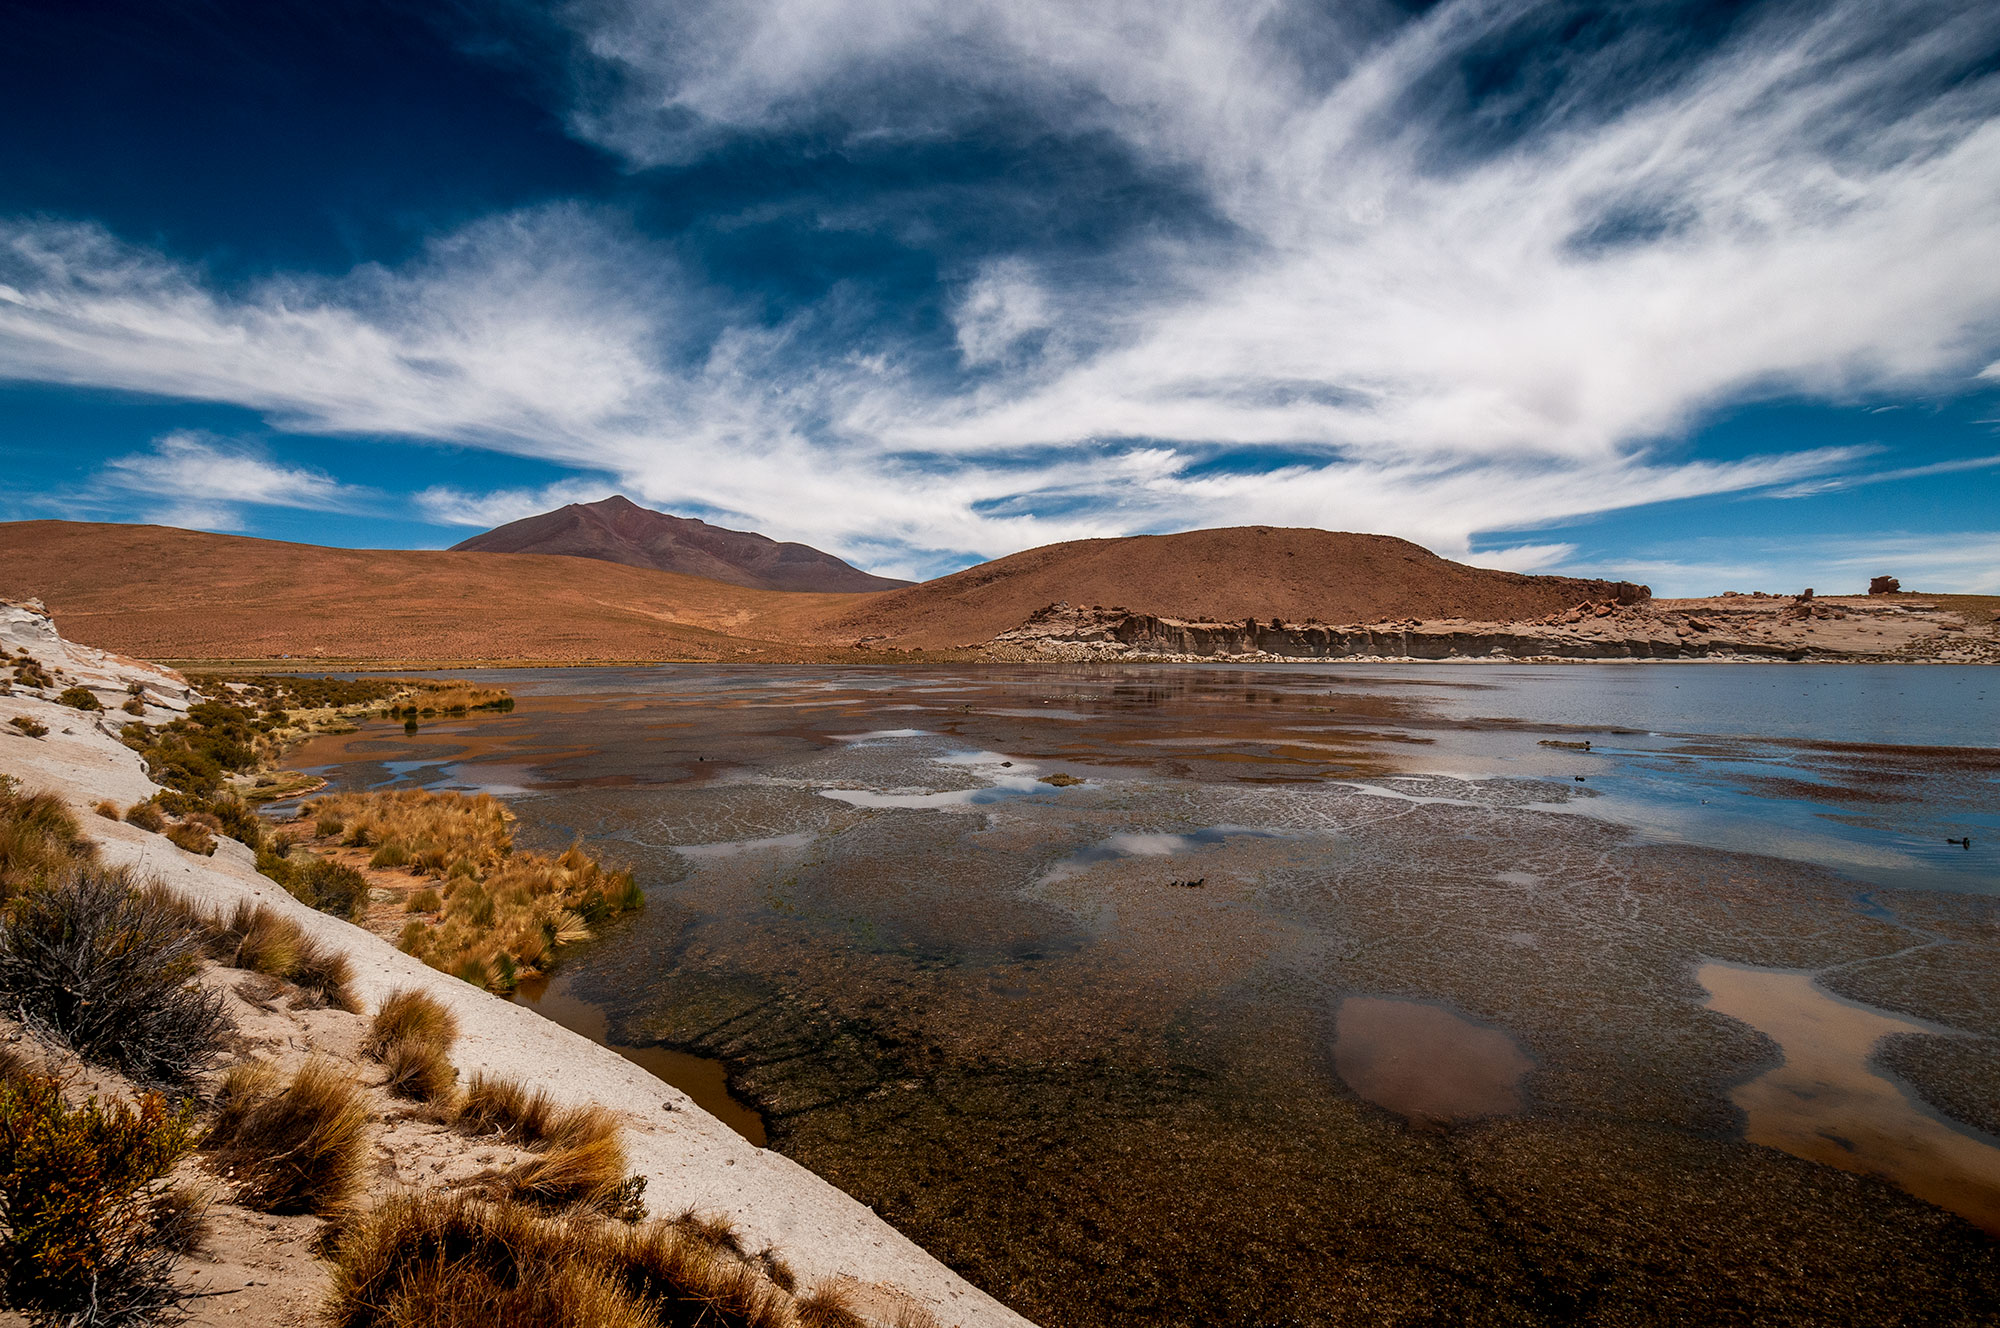 Photo of the Laguna Turquiri, which rises to 4,261 metres in the Bolivian Altiplano. This photo was captured by Swiss photographer, Jennifer Esseiva.